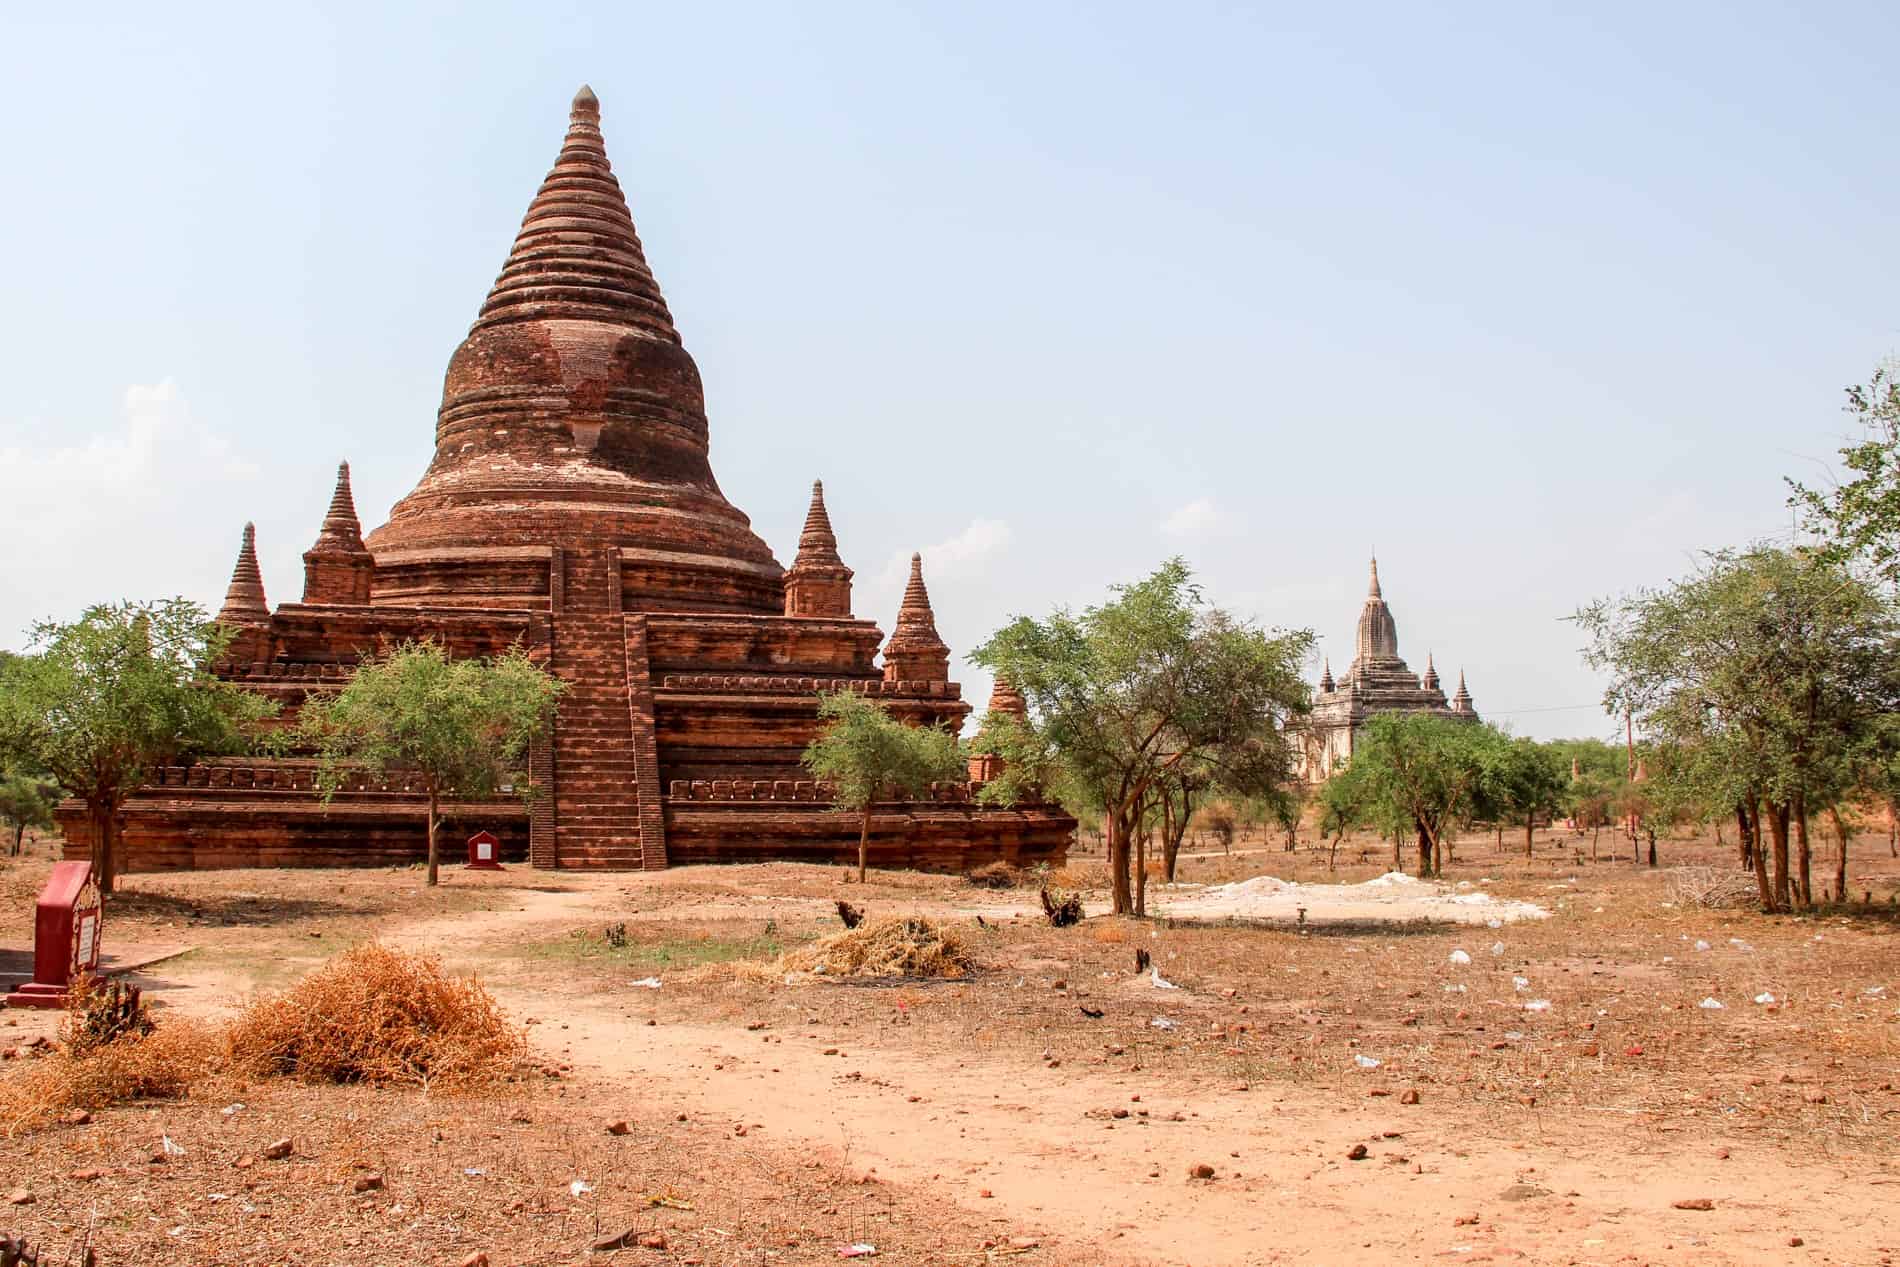 A large ochre red brick pagoda in front of a white temple in an isolated dusty forest. 